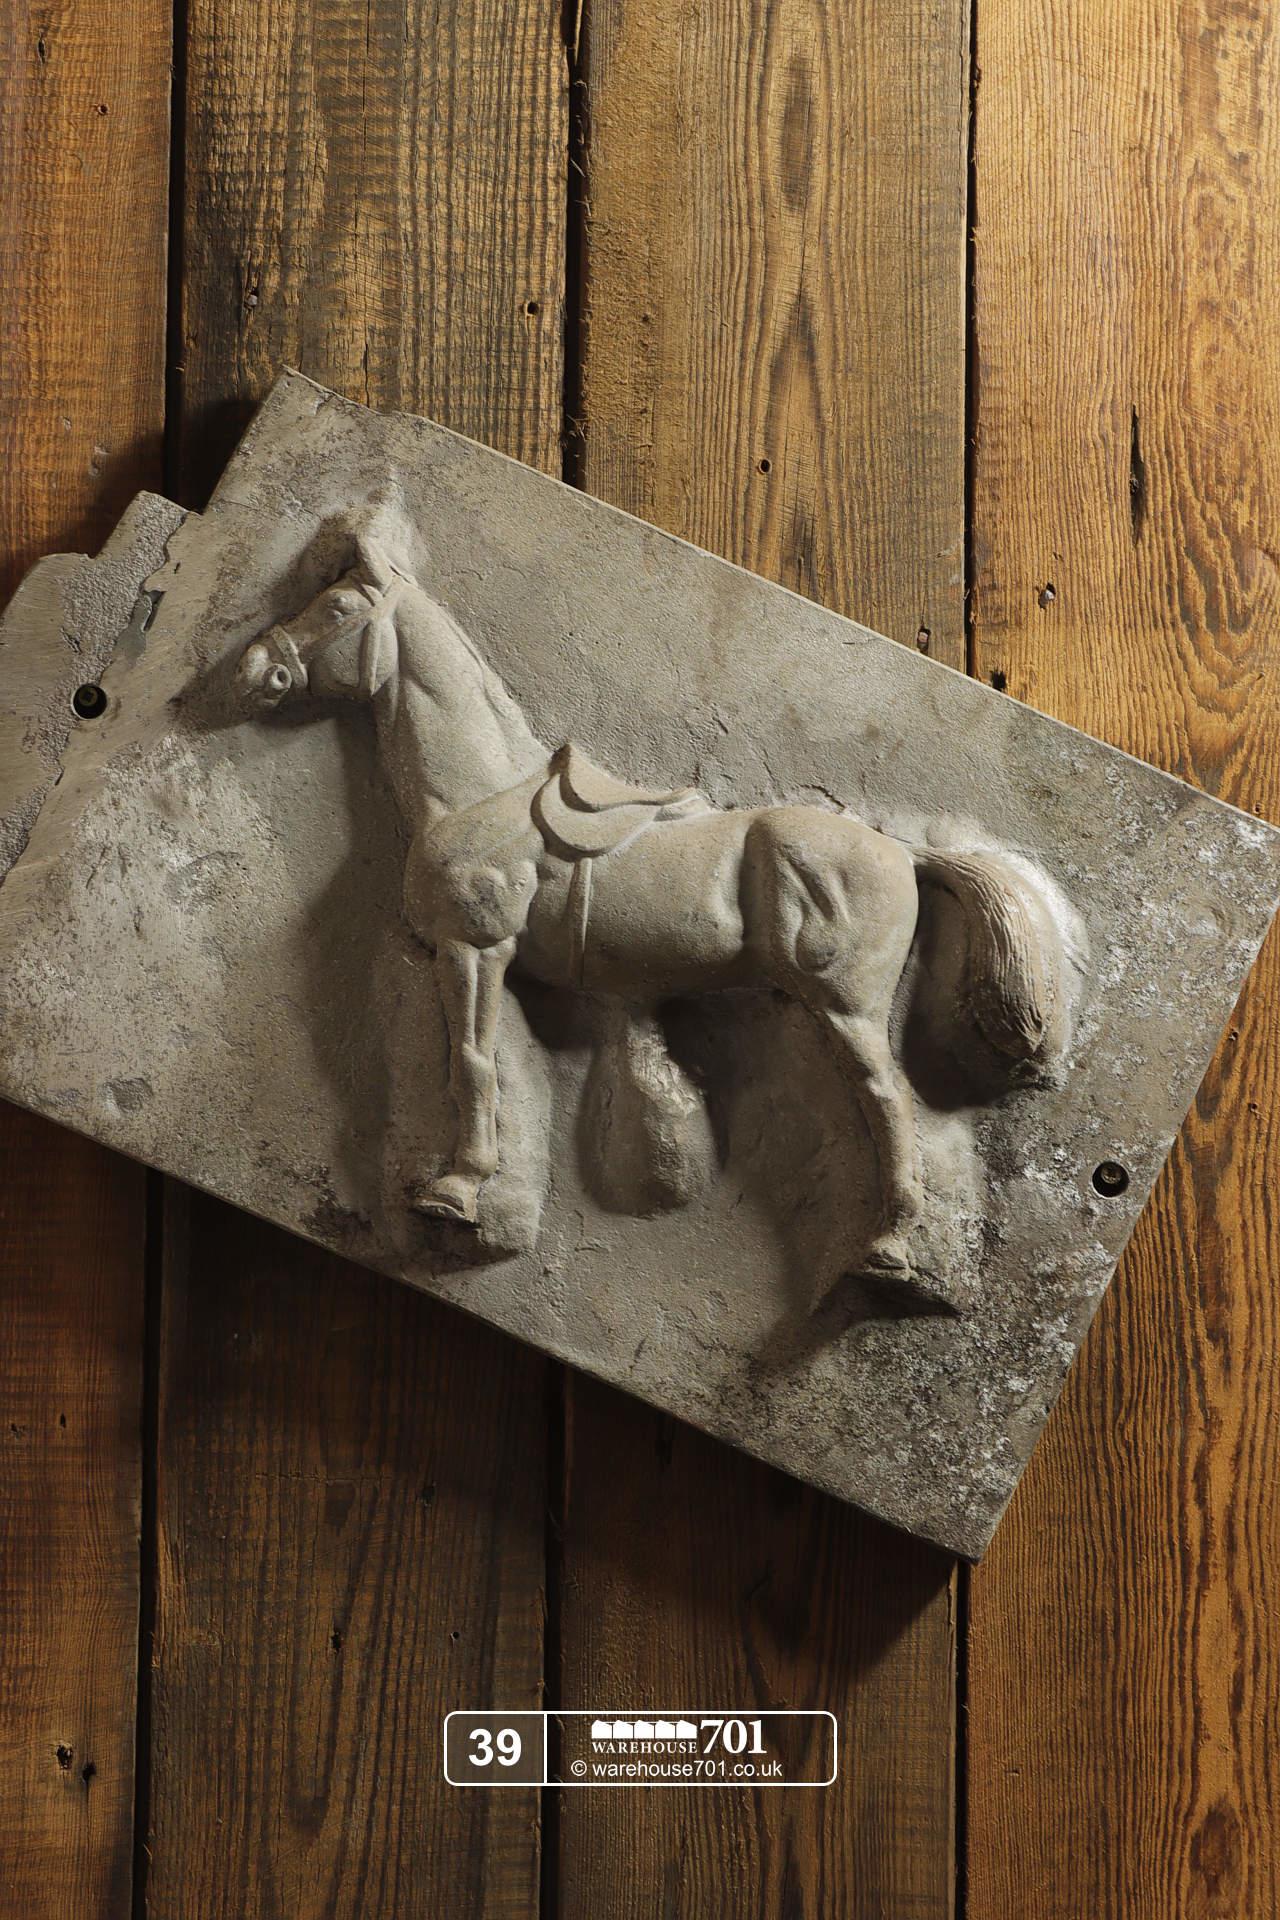 Aluminium Foundry Castings of Horses (No's 38, 39, 40, 41) for Shop, Retail and Home Display #8